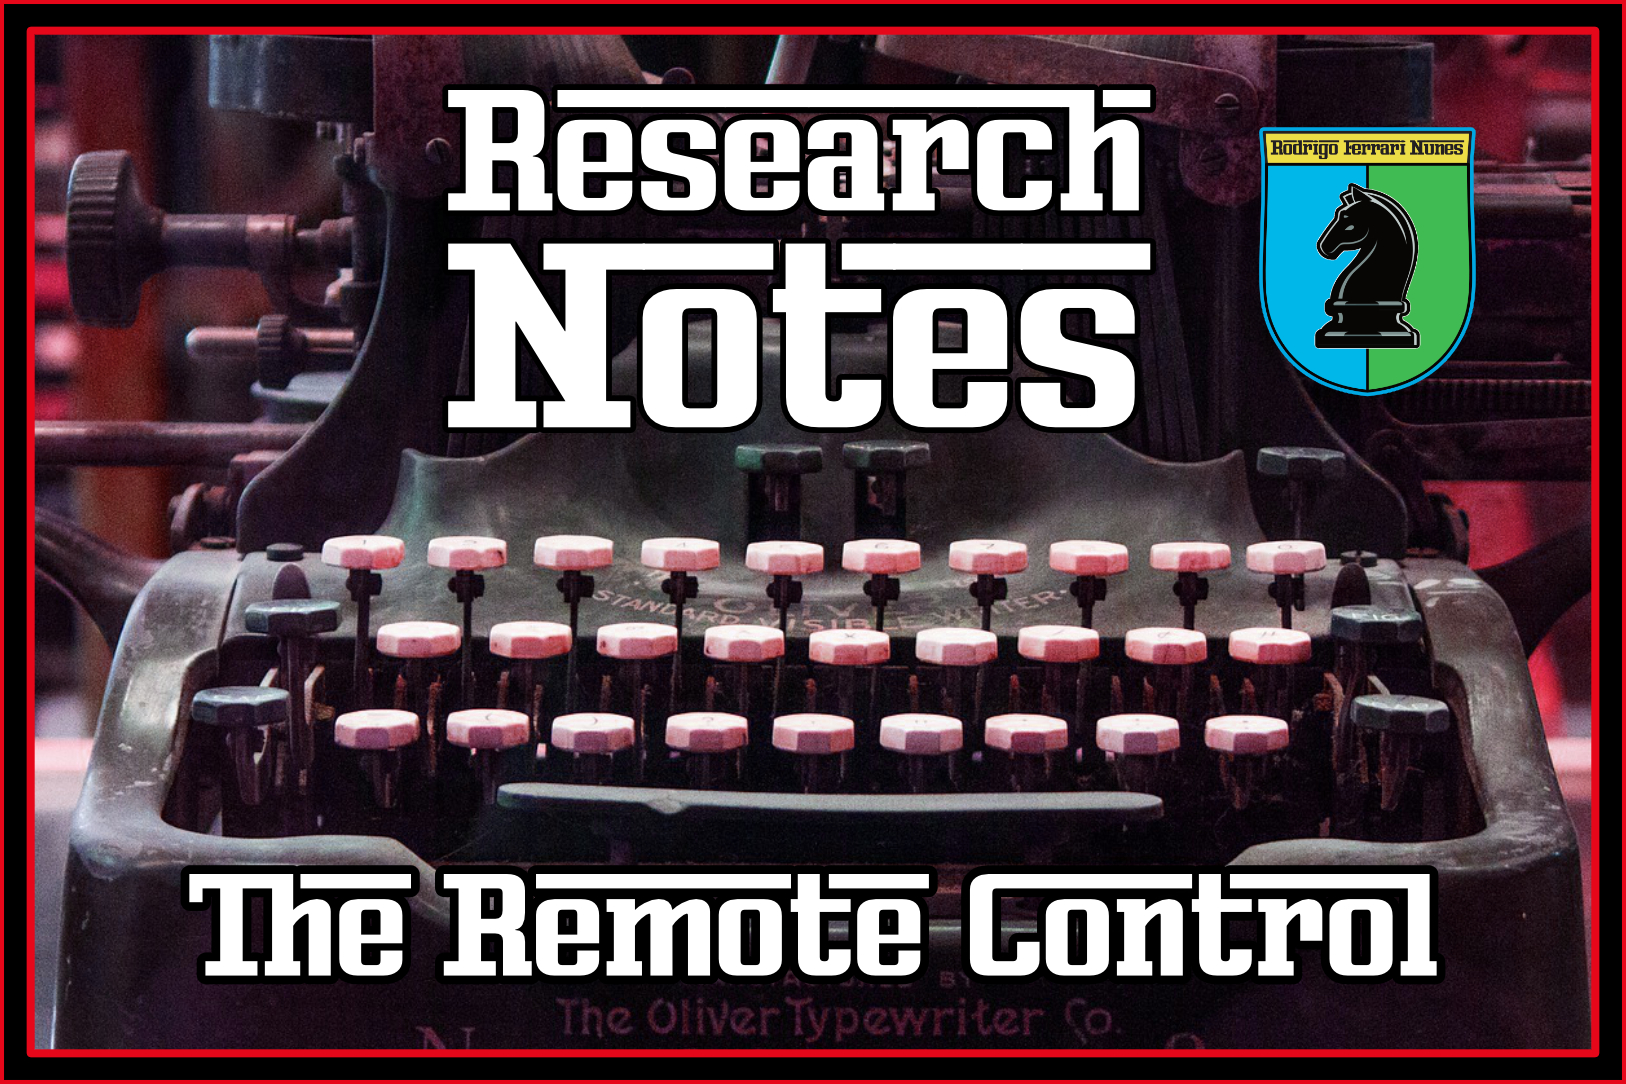 RESEARCH NOTES: THE REMOTE CONTROL